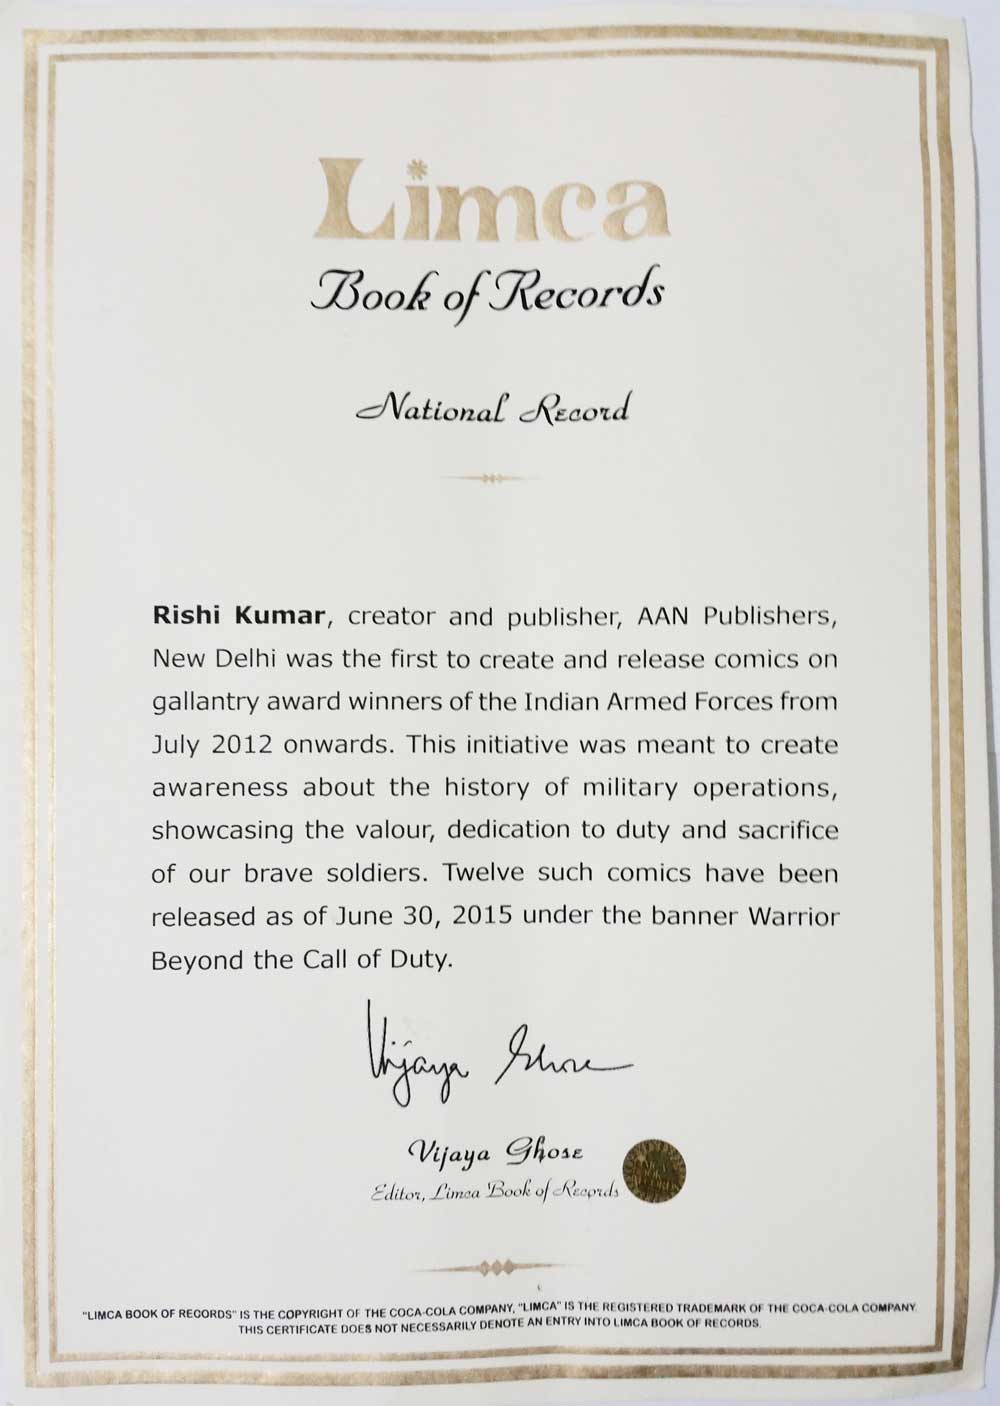 LIMCA book of National record, acknowledging our initiative & service to the nation for raising awareness about gallantry award winners through our work.